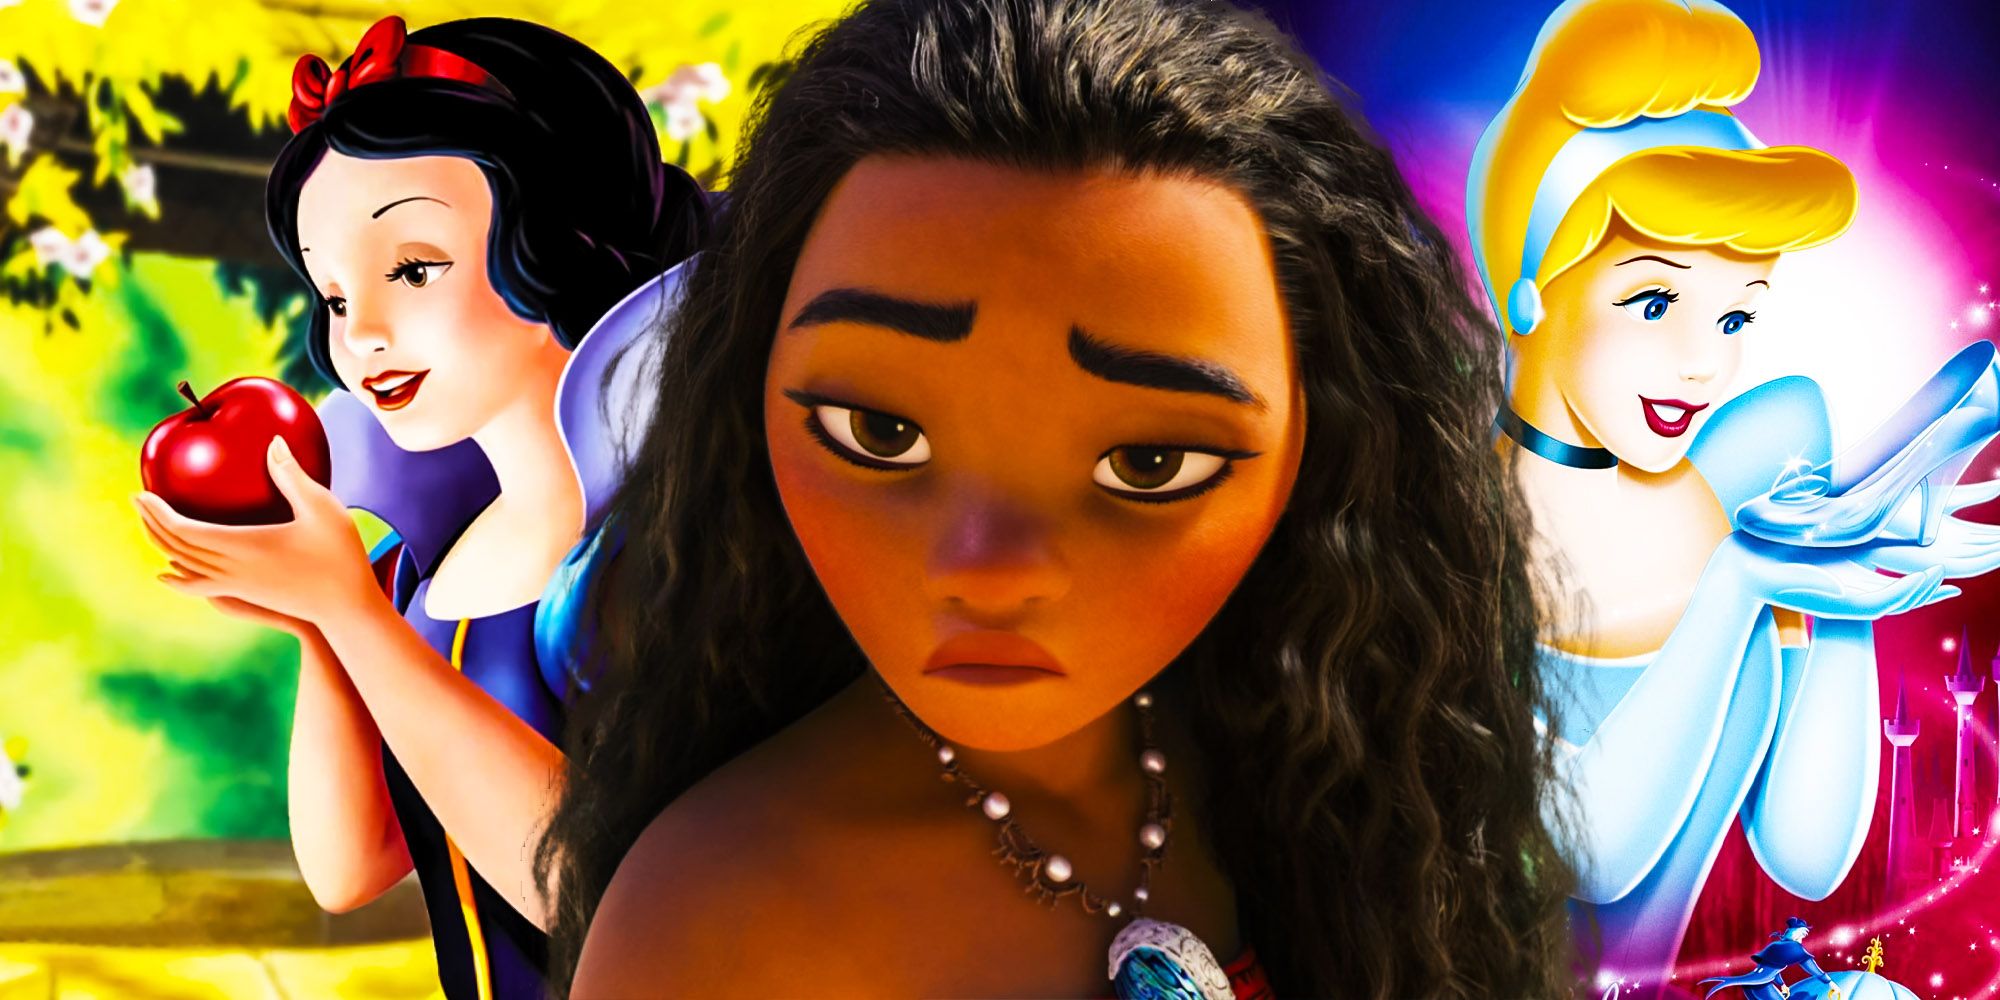 Disney’s Moana Remake Breaks Their Live-Action Rules